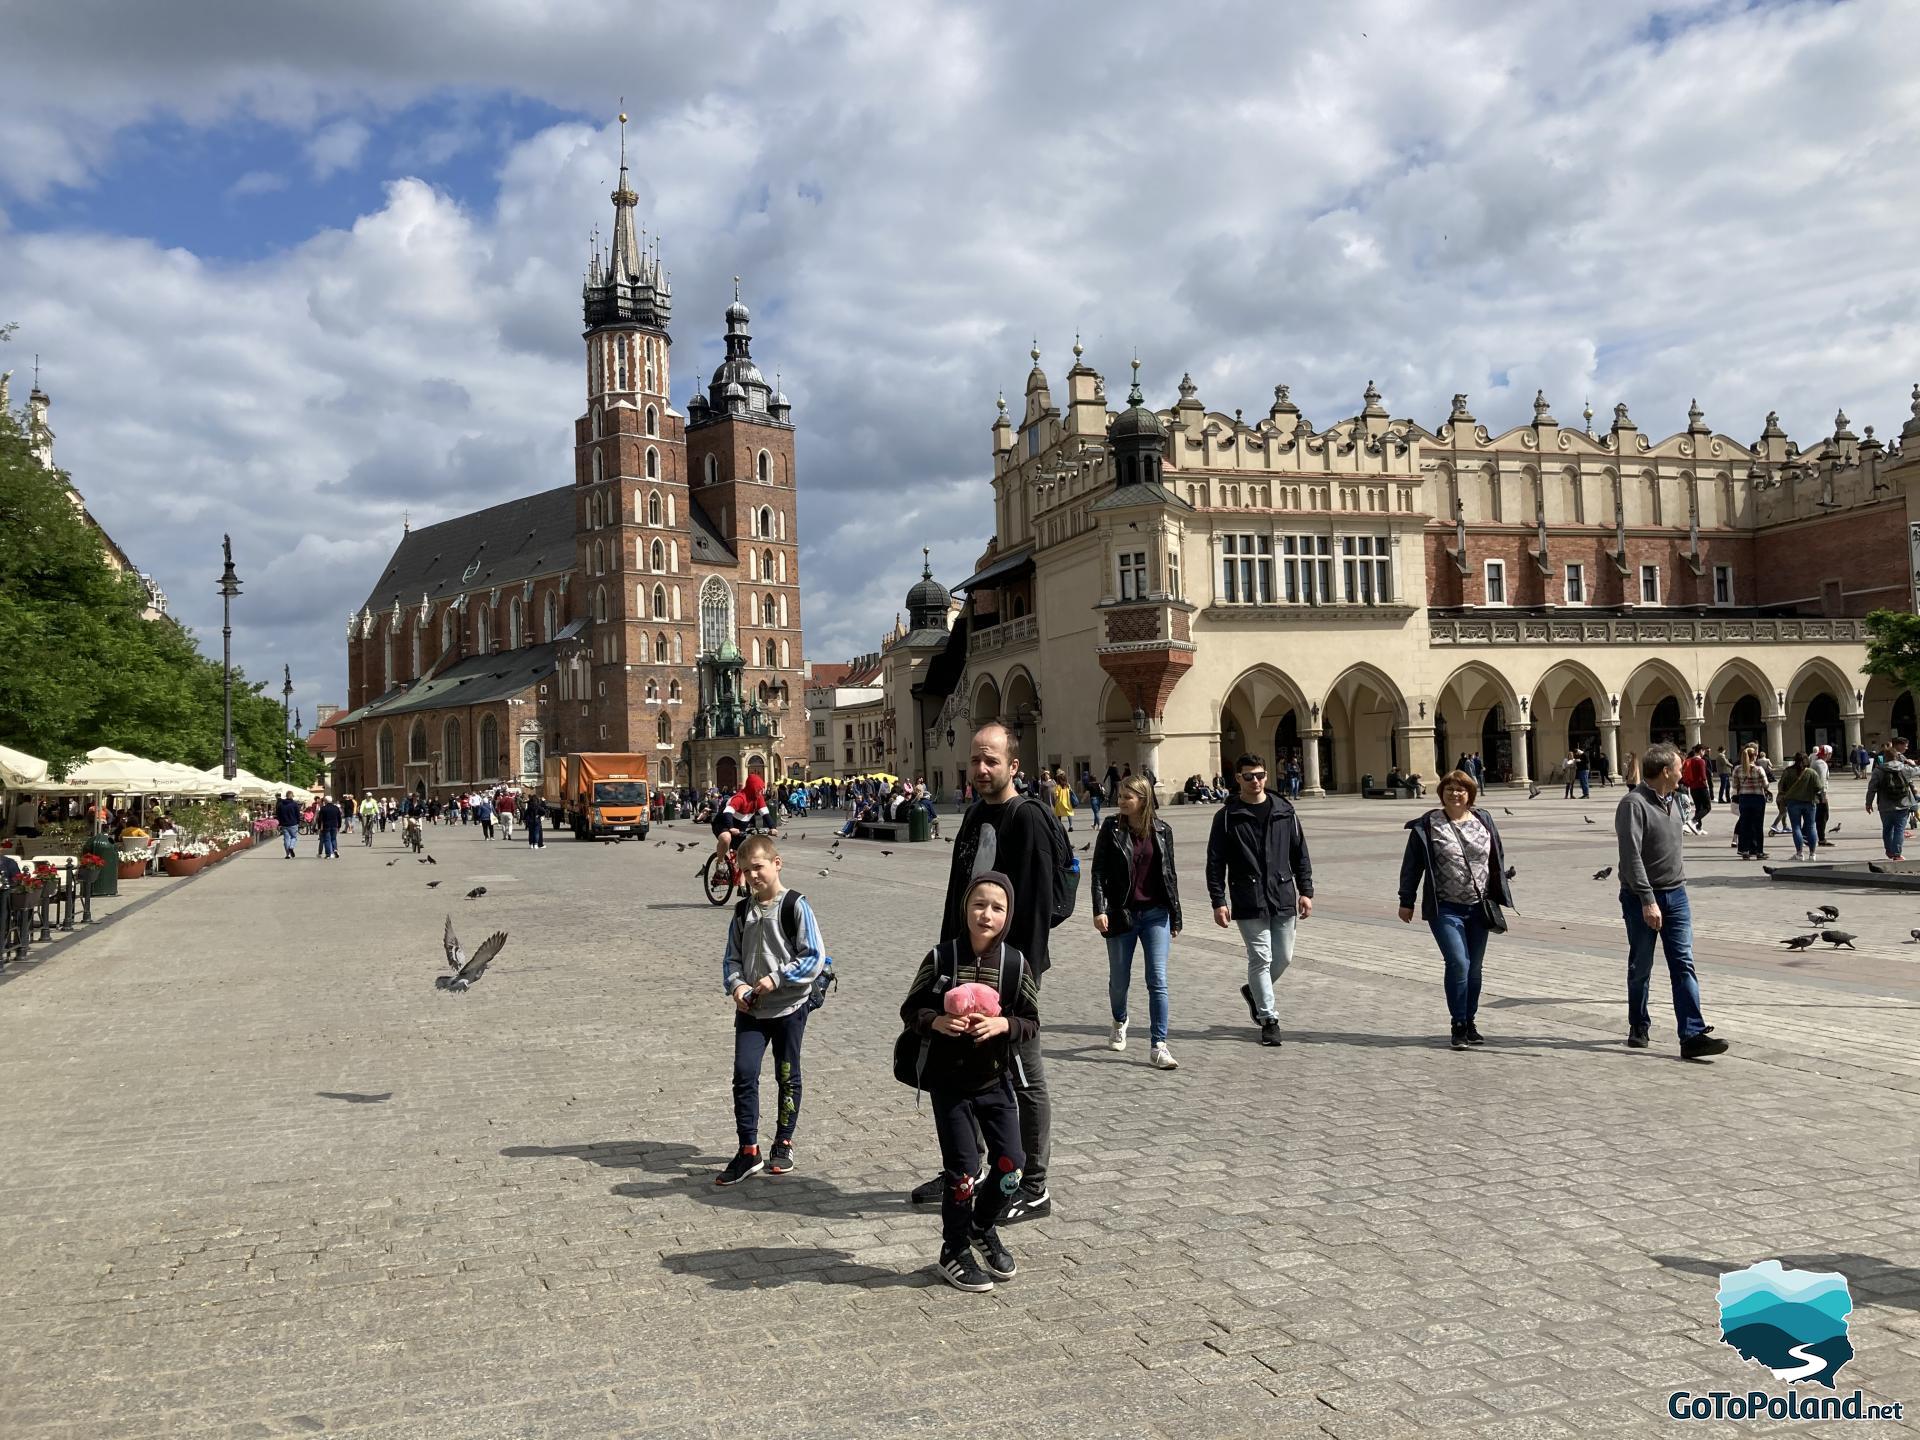 People are on the main square, you can see also pigeons and two buildings: one is a high church in Gothic style, the second building is quite bright with small towers on top